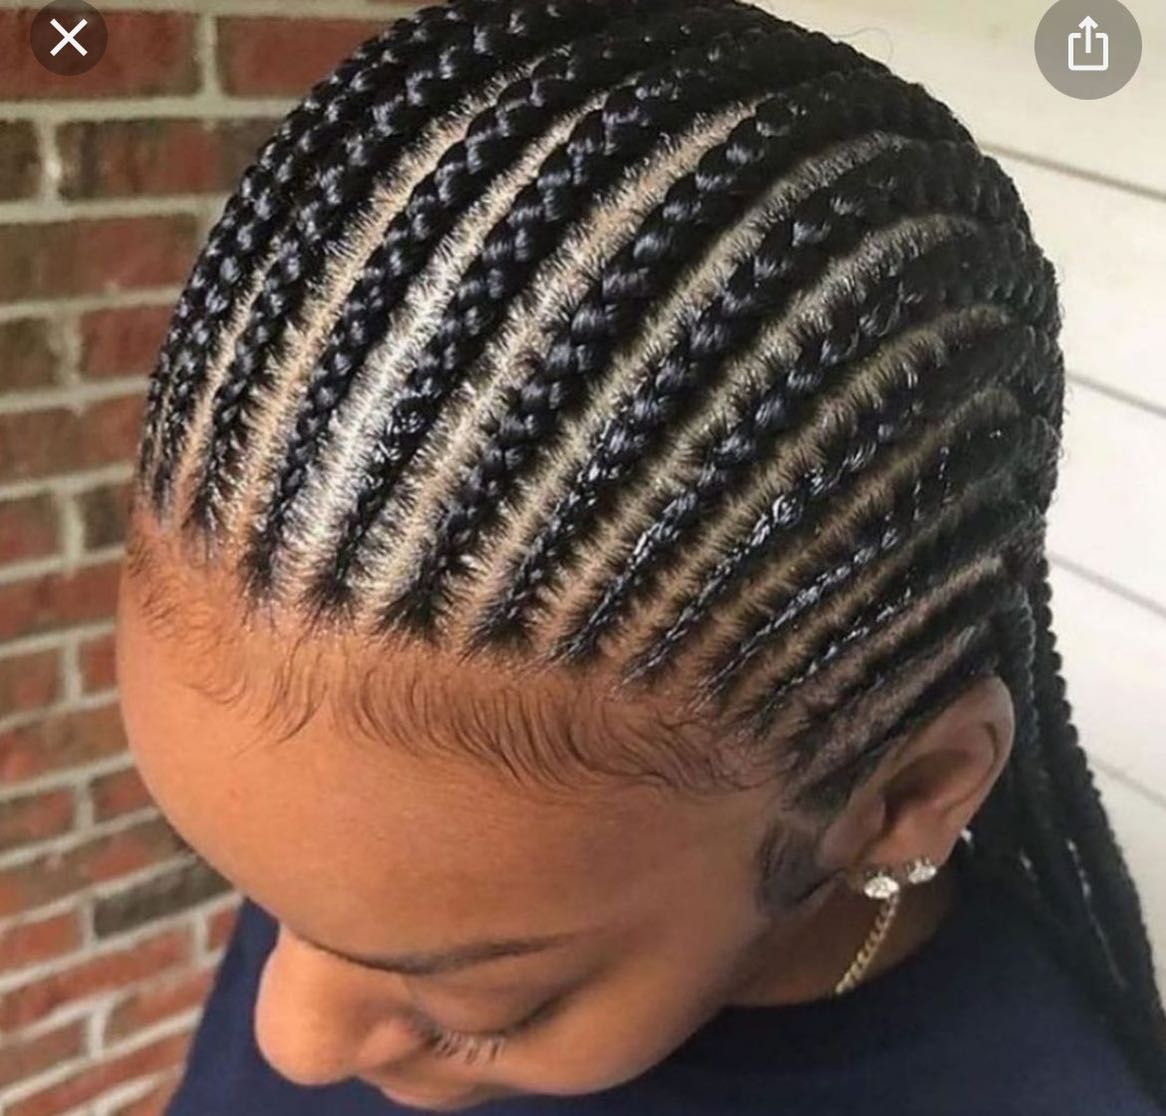 Feeding cornrows with from $120 and up) portfolio